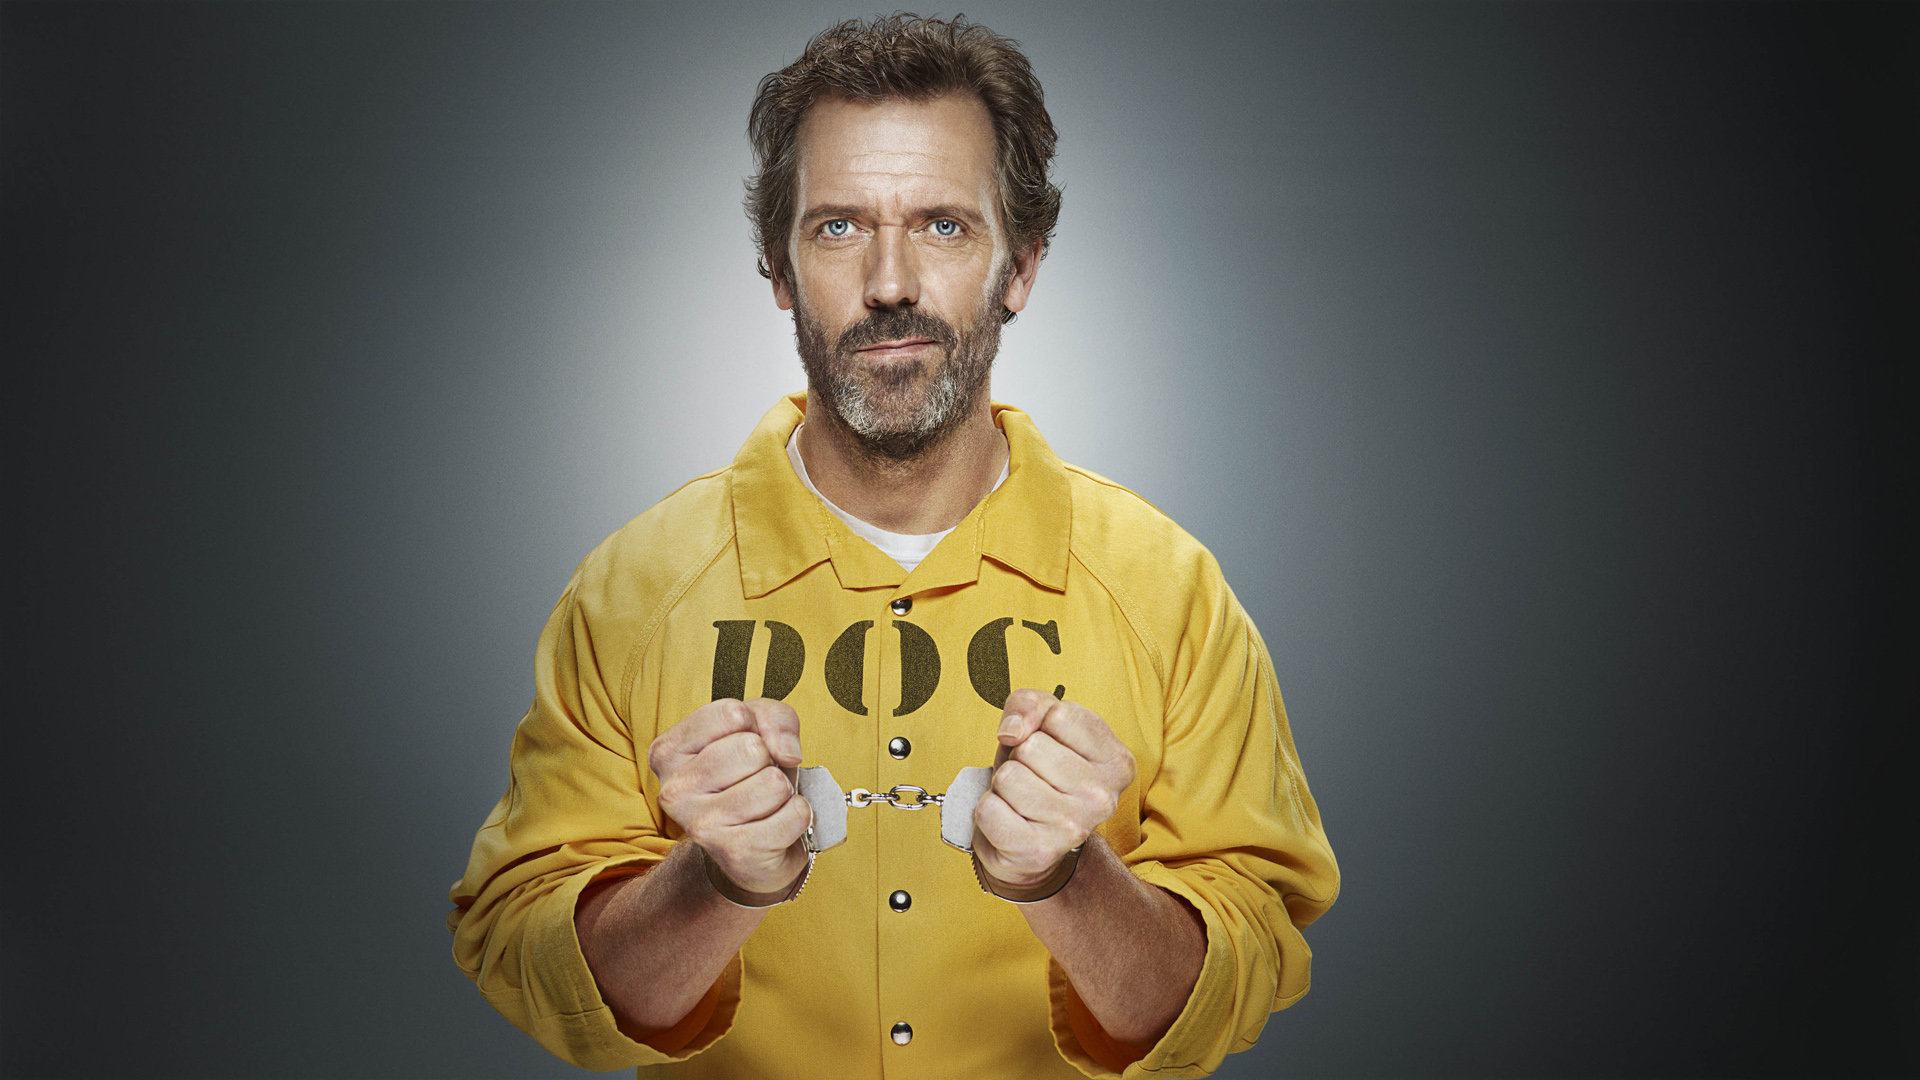 House High Quality Wallpaper Id - Dr House Wallpapers Hd - HD Wallpaper 